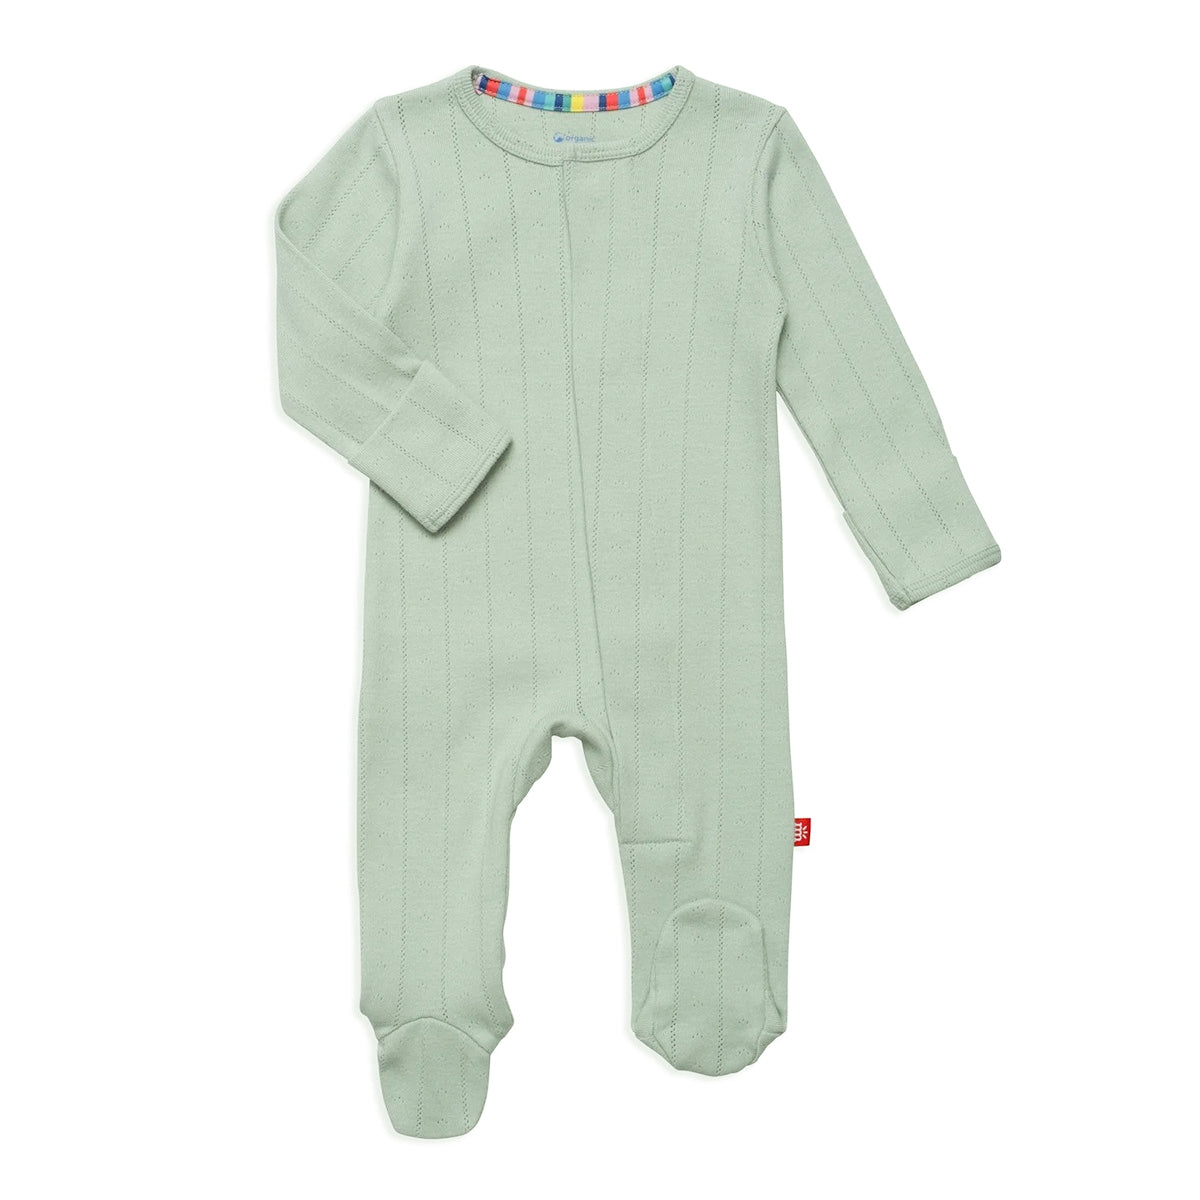 Magnetic Me Love Lines Seagrass Pointelle Organic Cotton Baby Footie